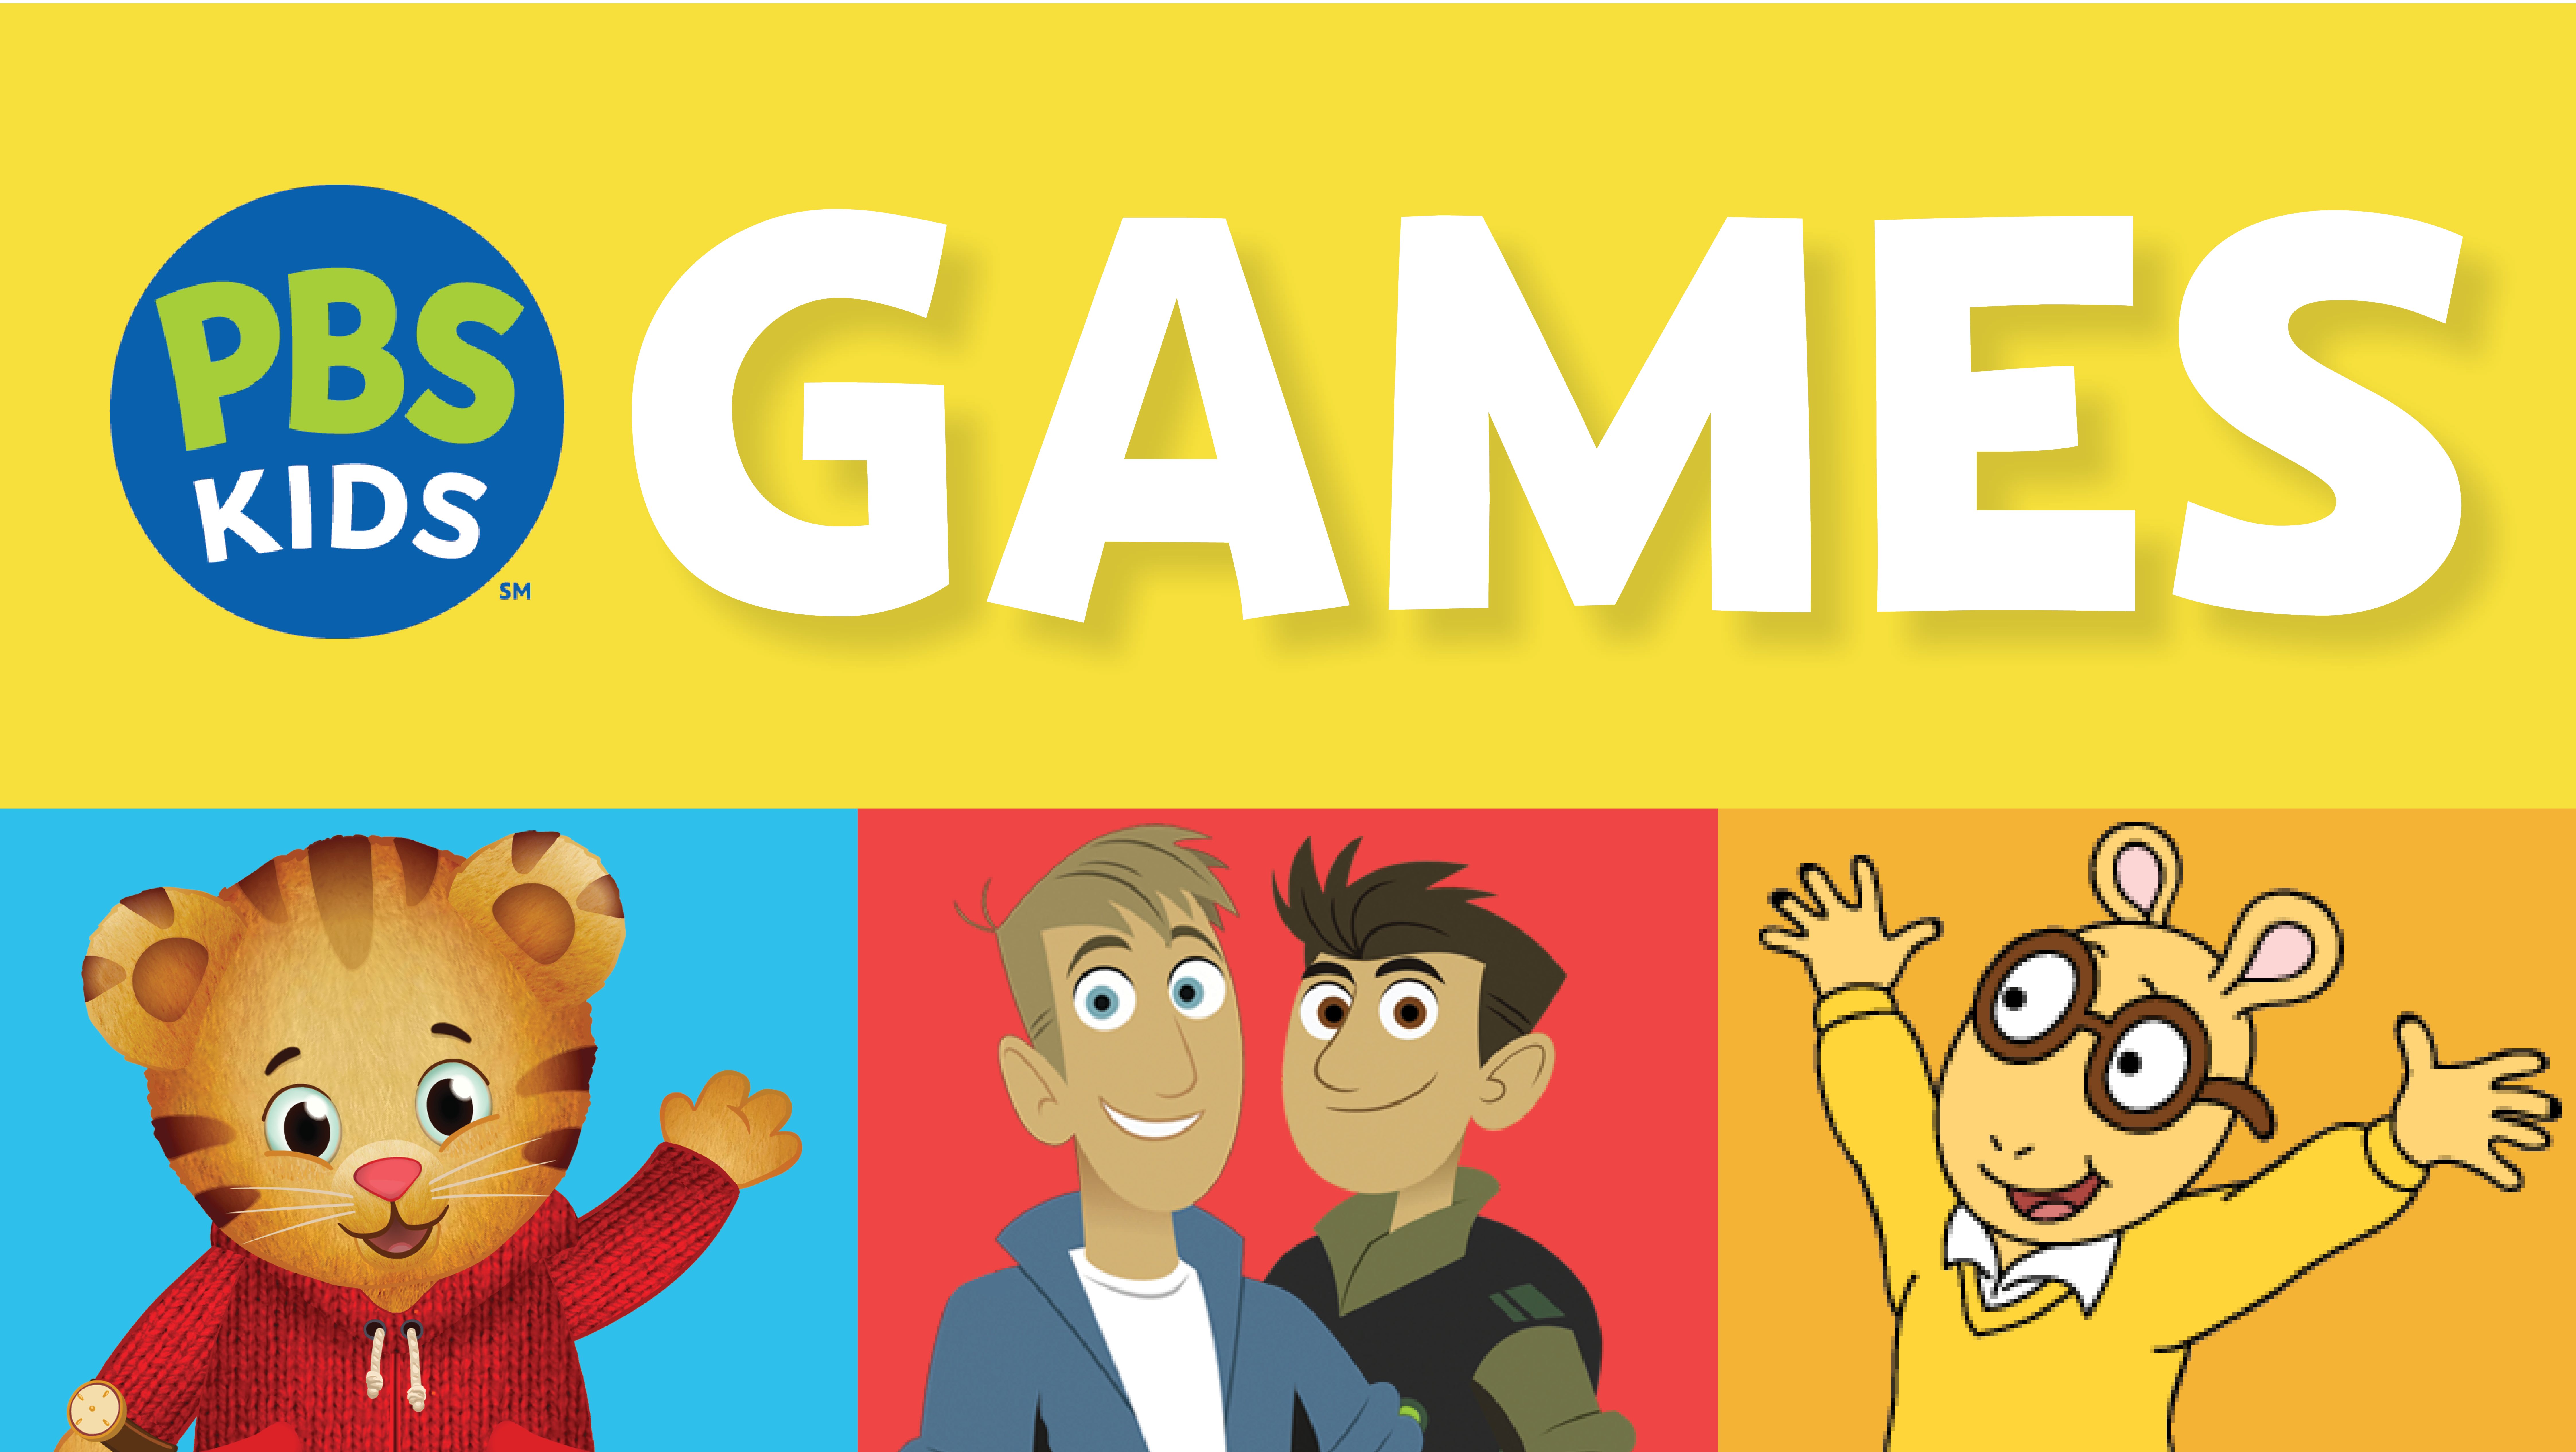 PBS Kids - Play a game today graphic - Daniel Tiger is waving, the Kratts brothers are smiling, and Arthur is waving both his hands. 